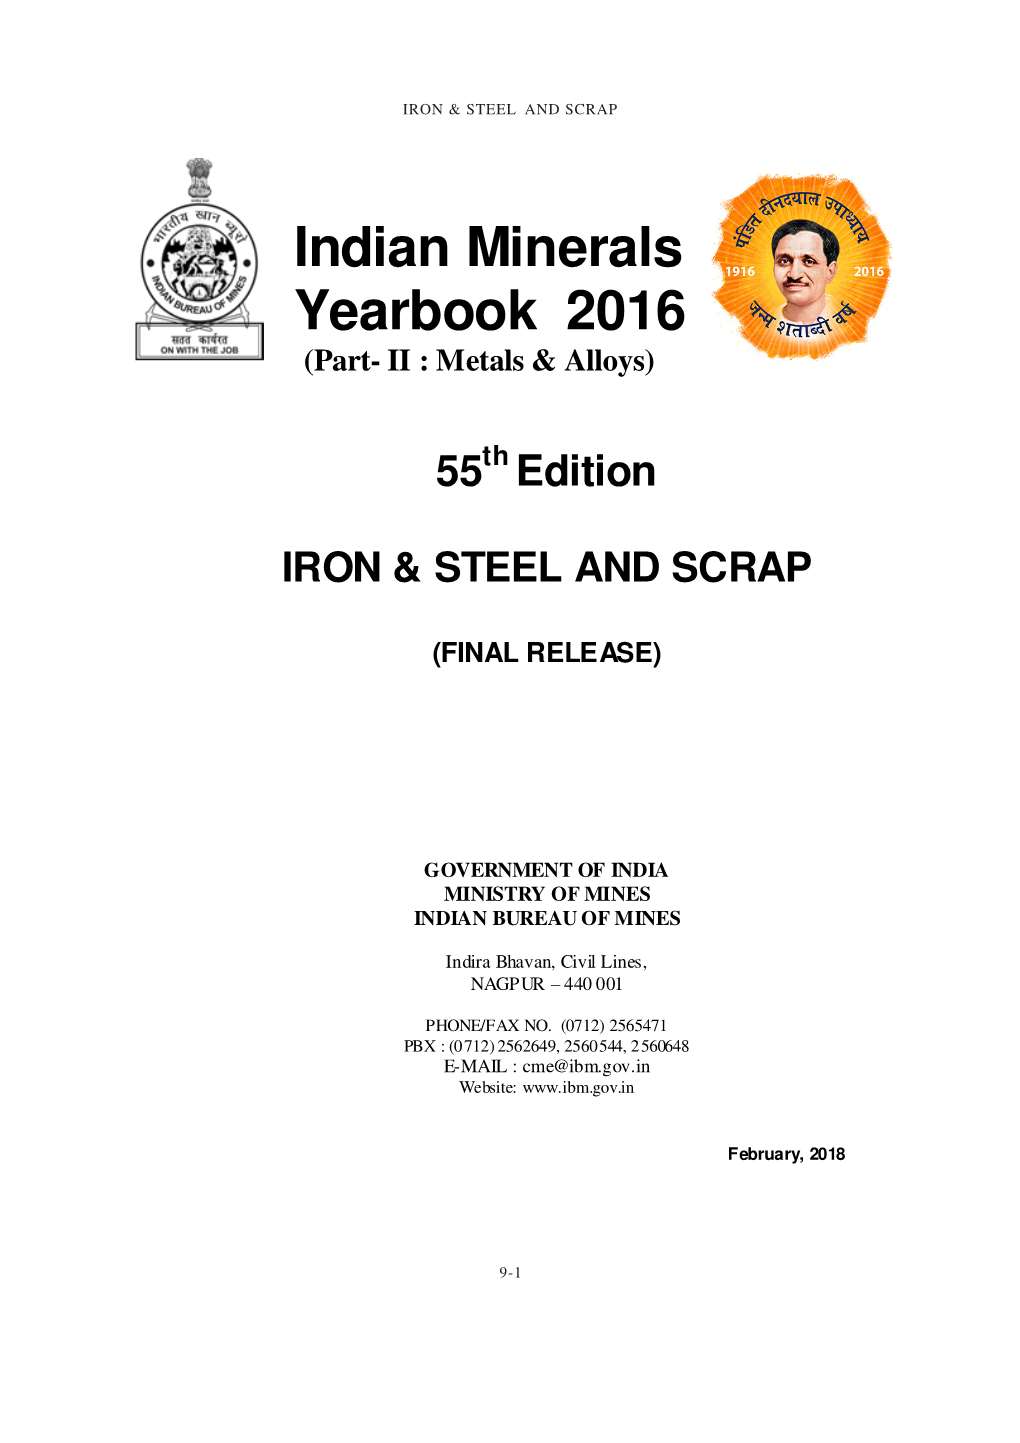 Iron & Steel and Scrap 2016.Pmd